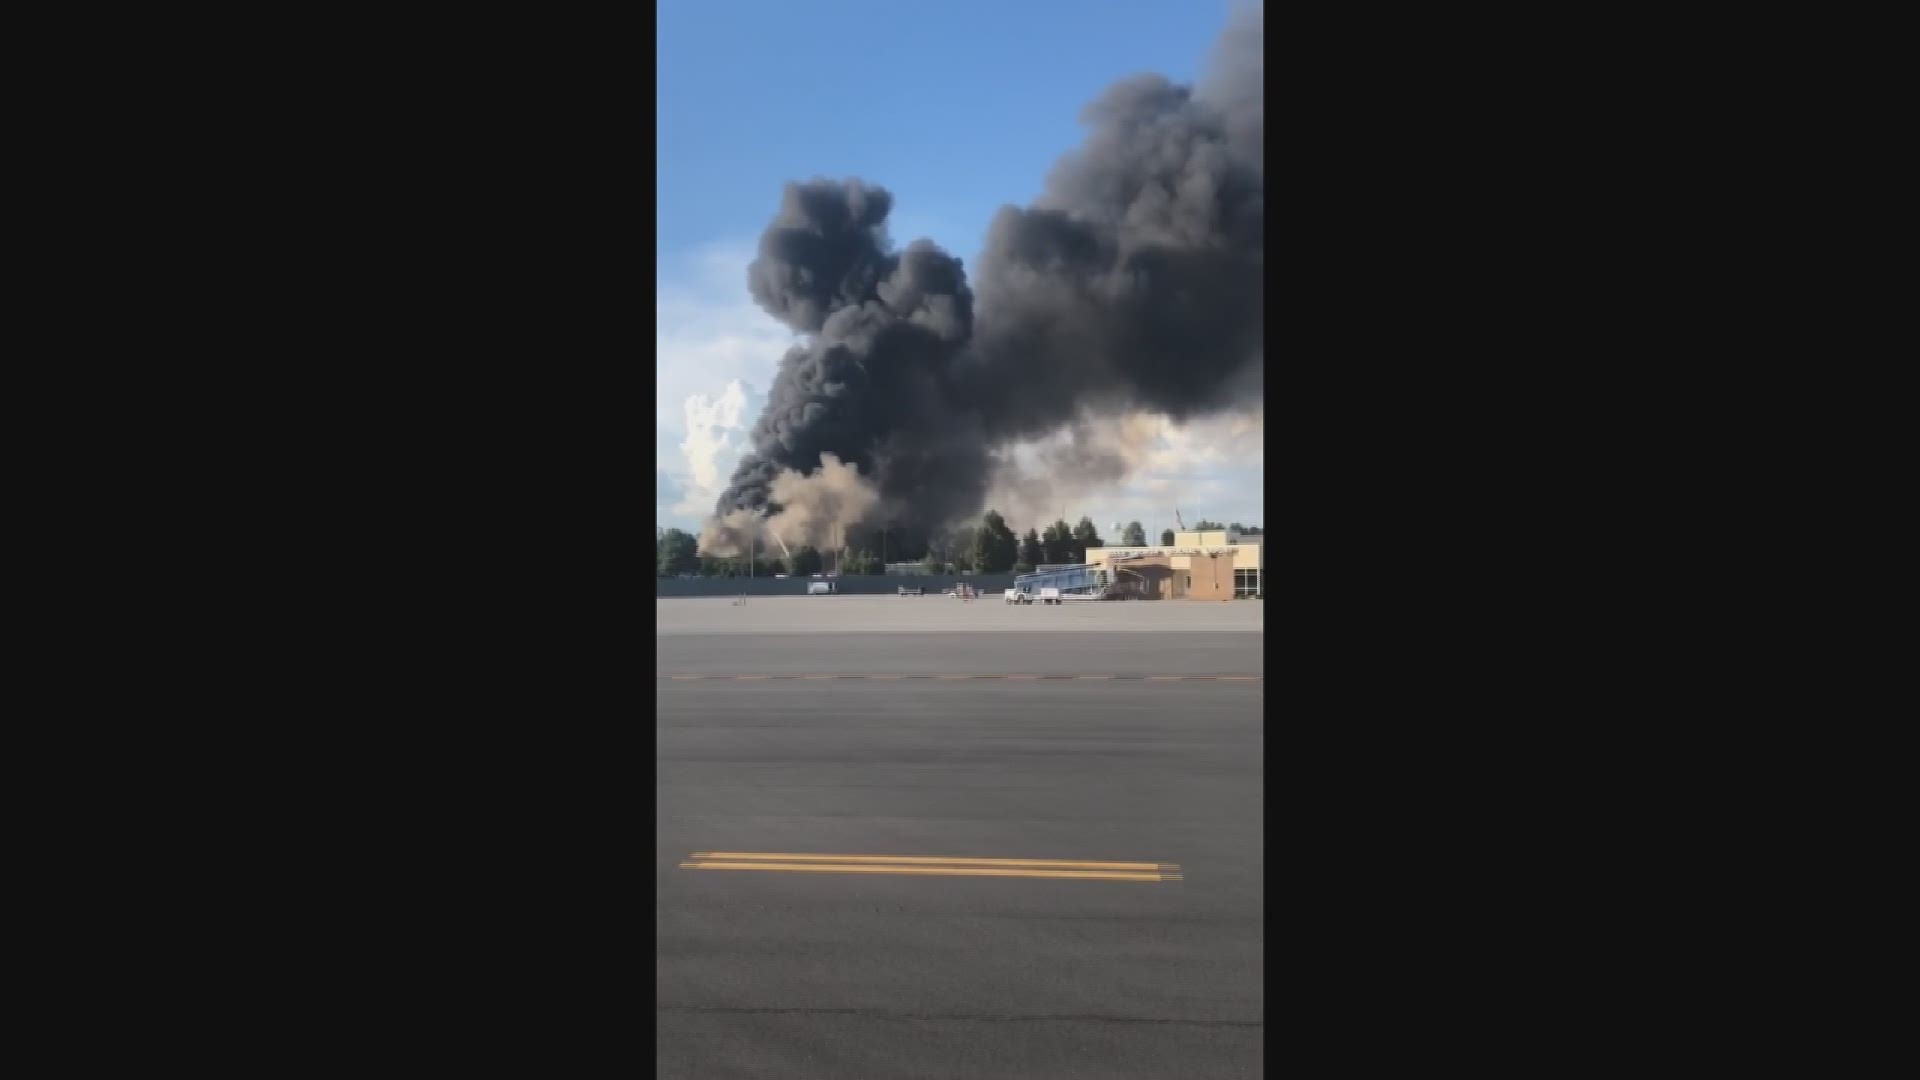 The fire is at the ABC Supply Co. plant on Delta Drive off Industrial Park Drive.  It is a roofing company that distributes siding, windows and other select exterior and interior building products, tools and related supplies.